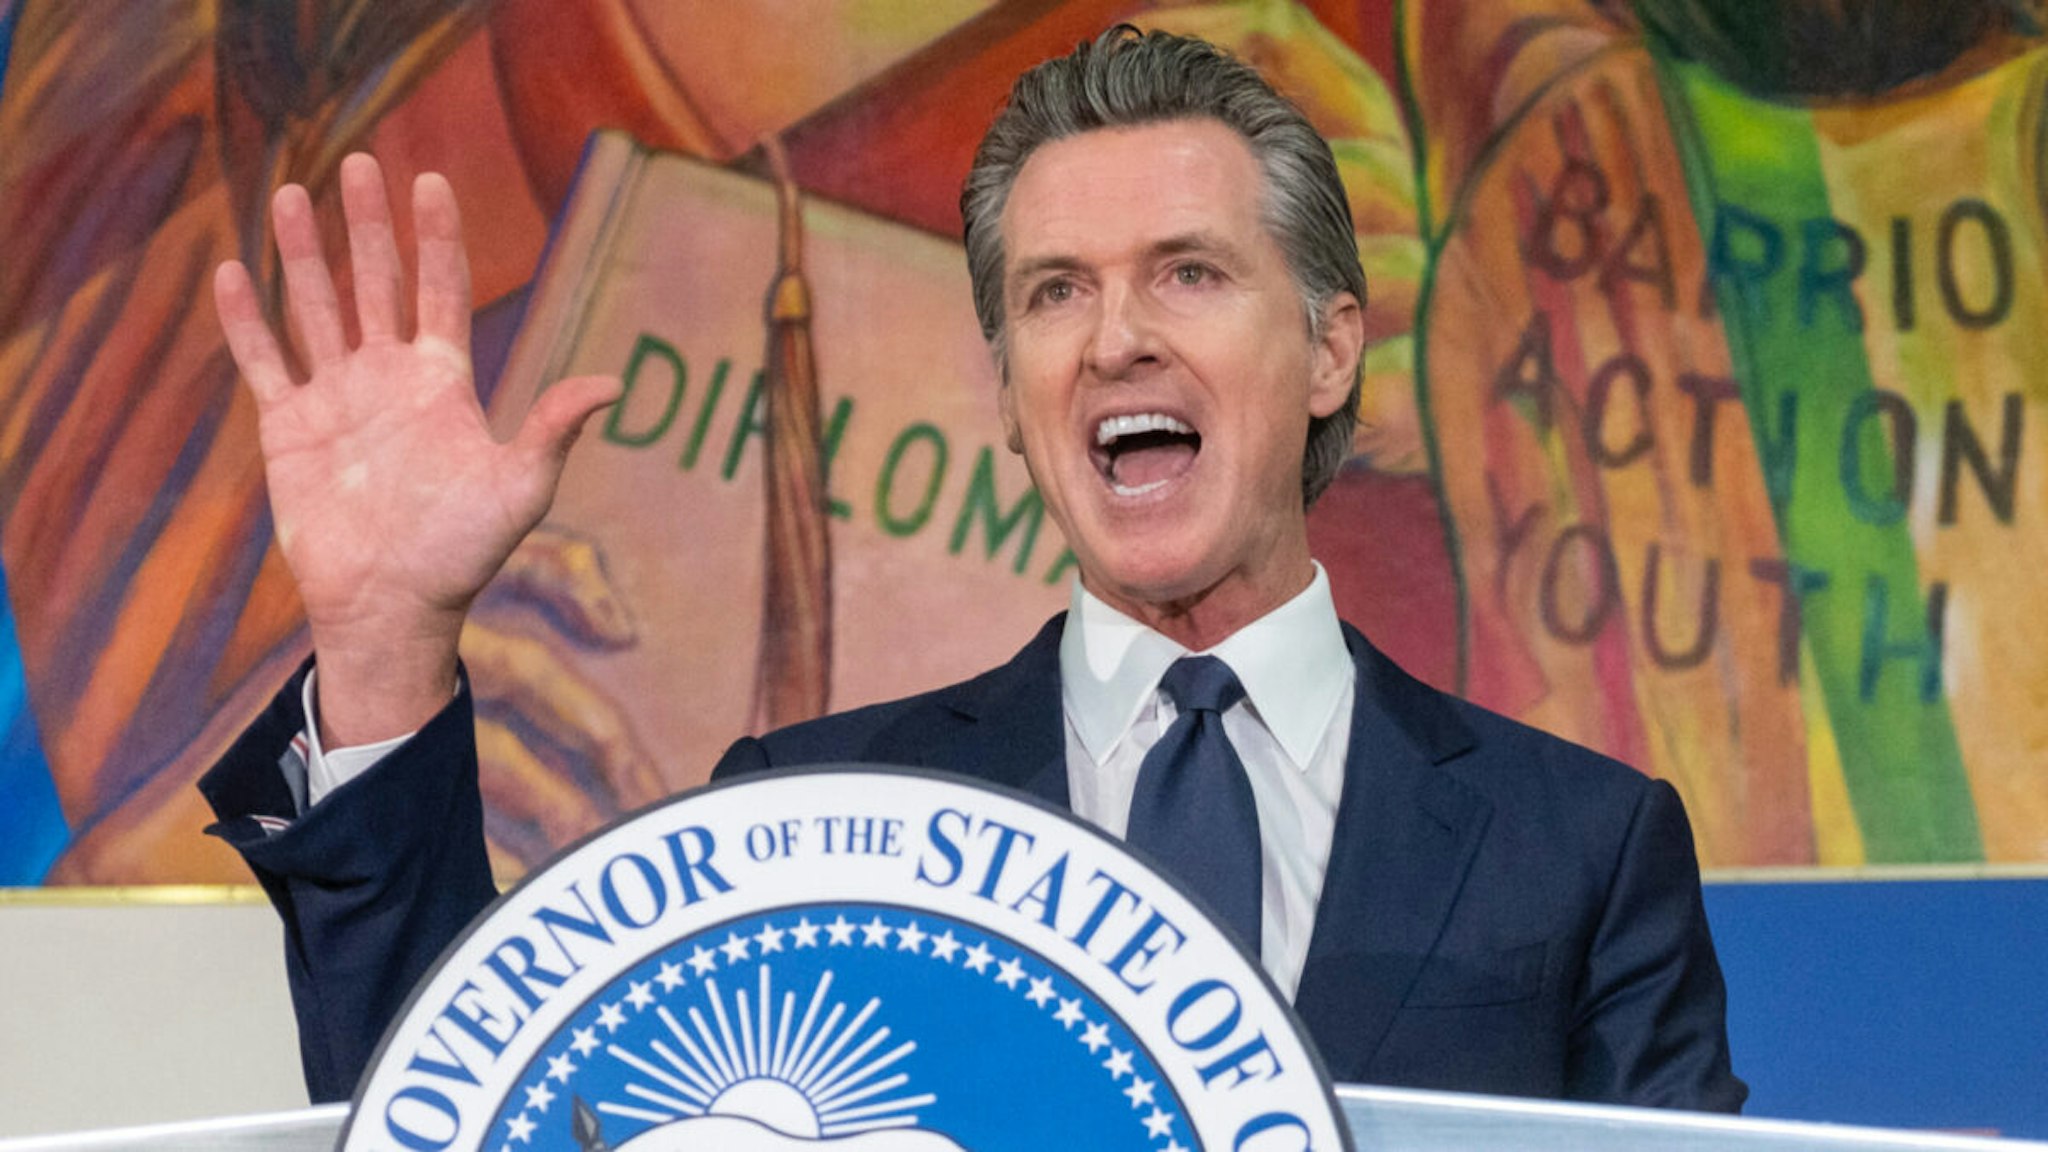 California Governor Gavin Newsom during a rally in Los Angeles, Tuesday, July 13, 2021.